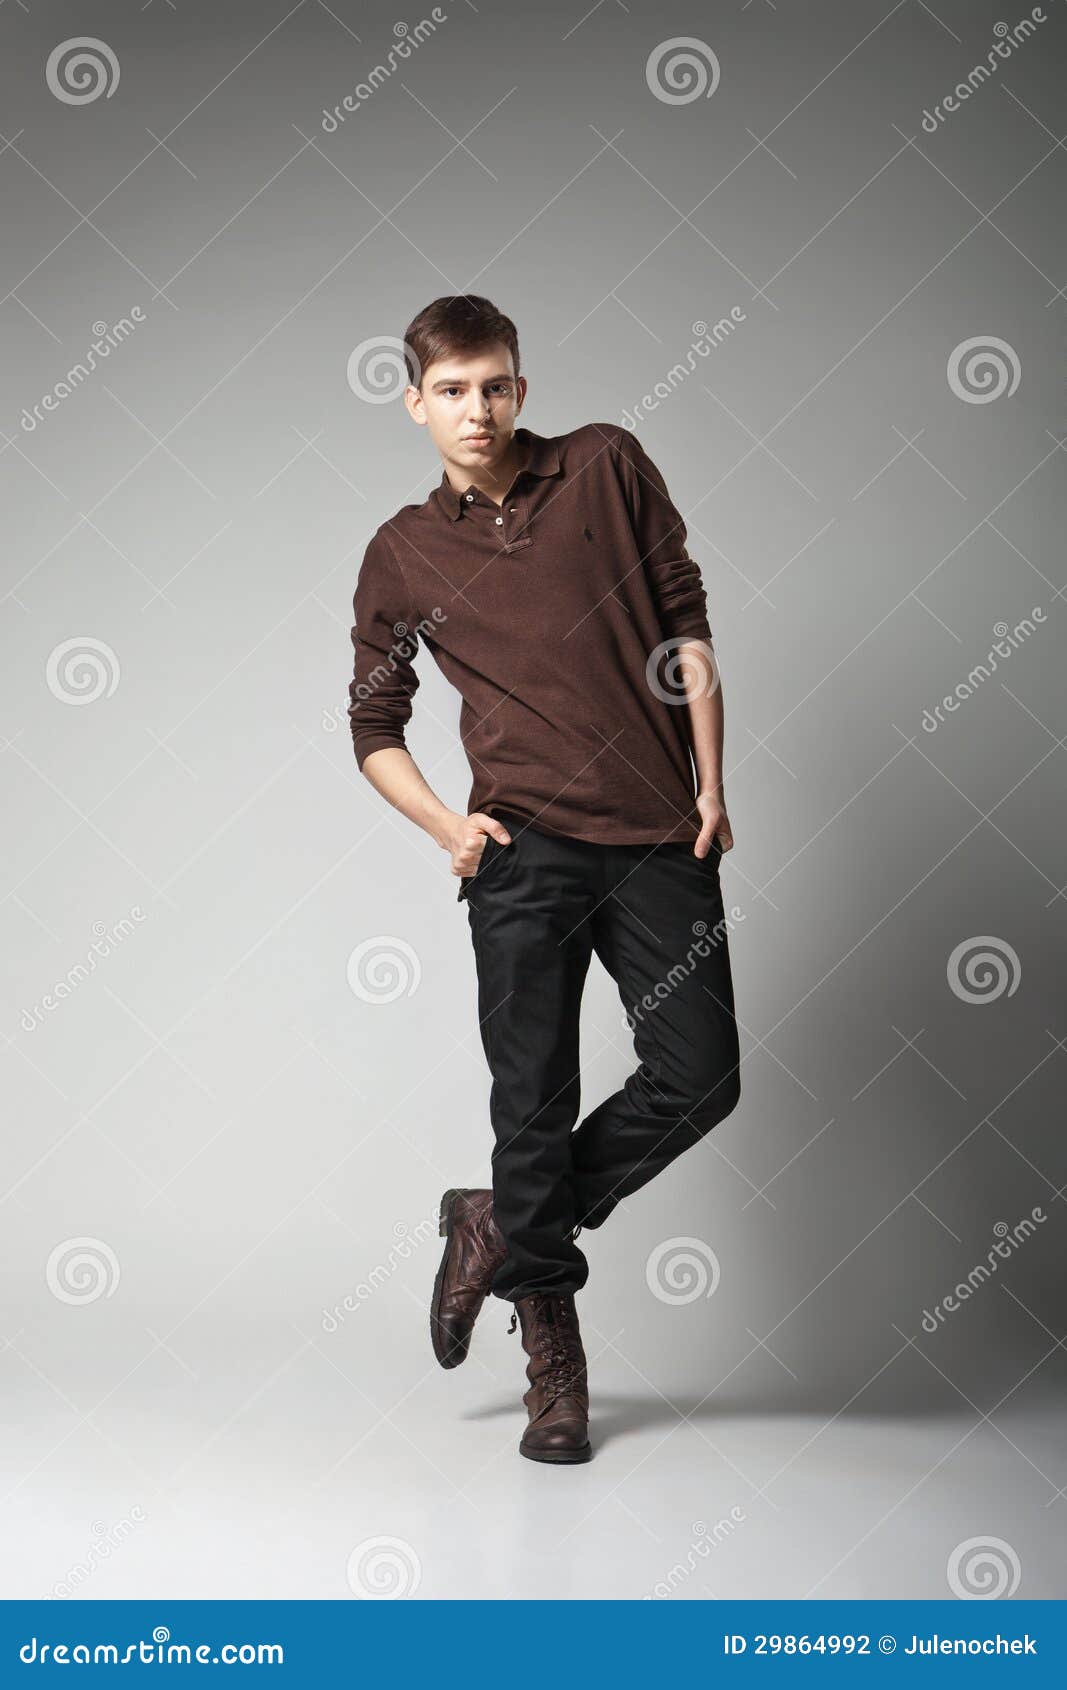 Male models poses, Model poses, Male poses-thanhphatduhoc.com.vn